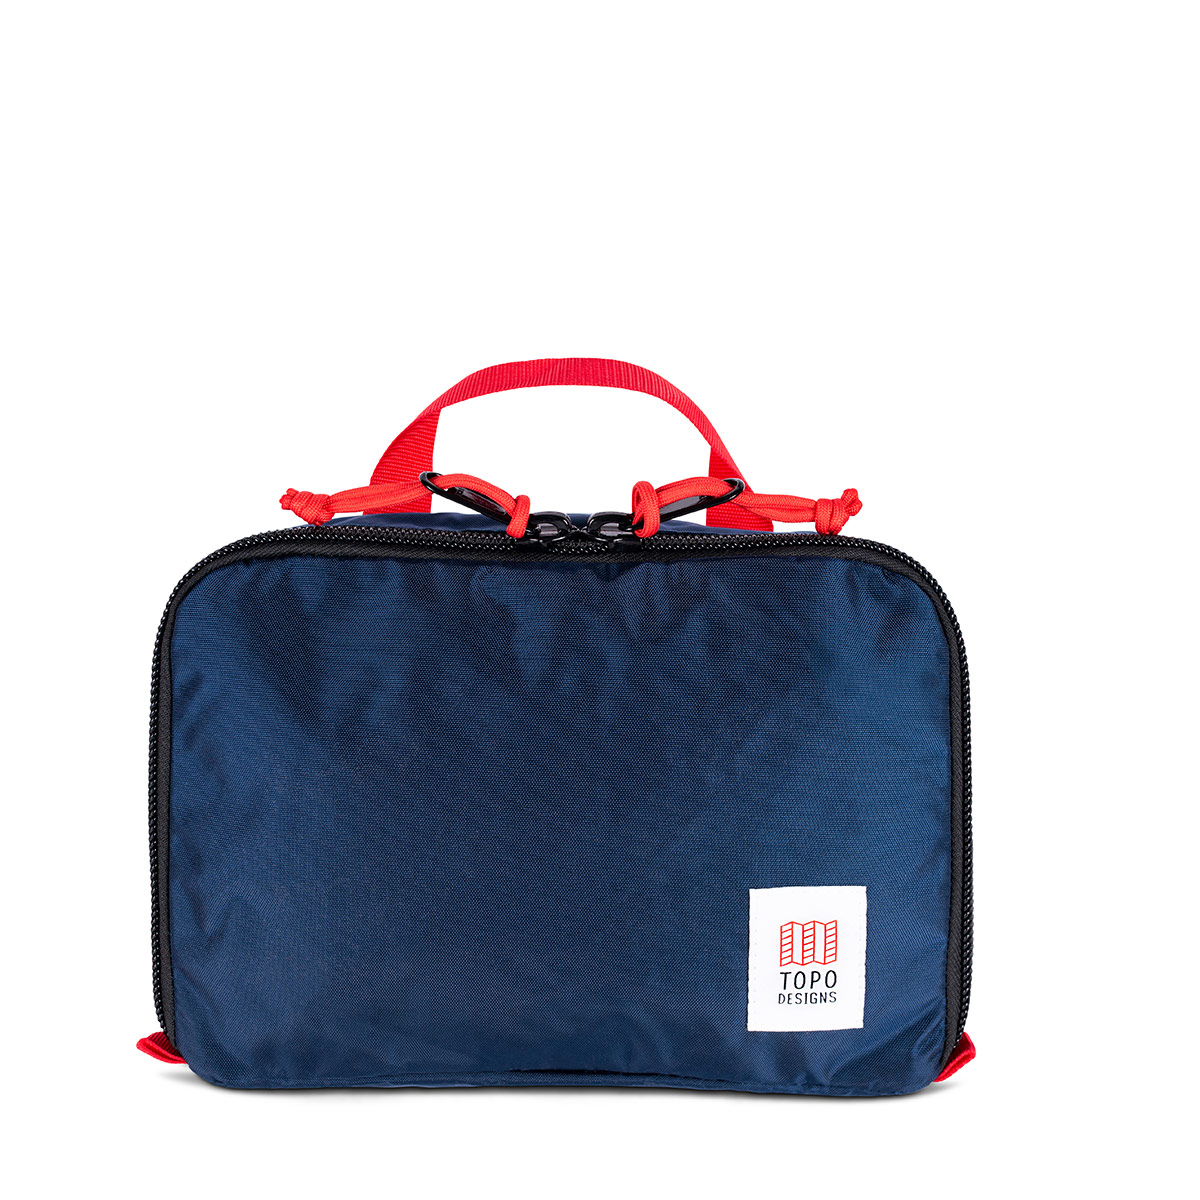 Topo Designs Pack Bag 5L Navy, a simple, durable and highly functional way to organize your luggage